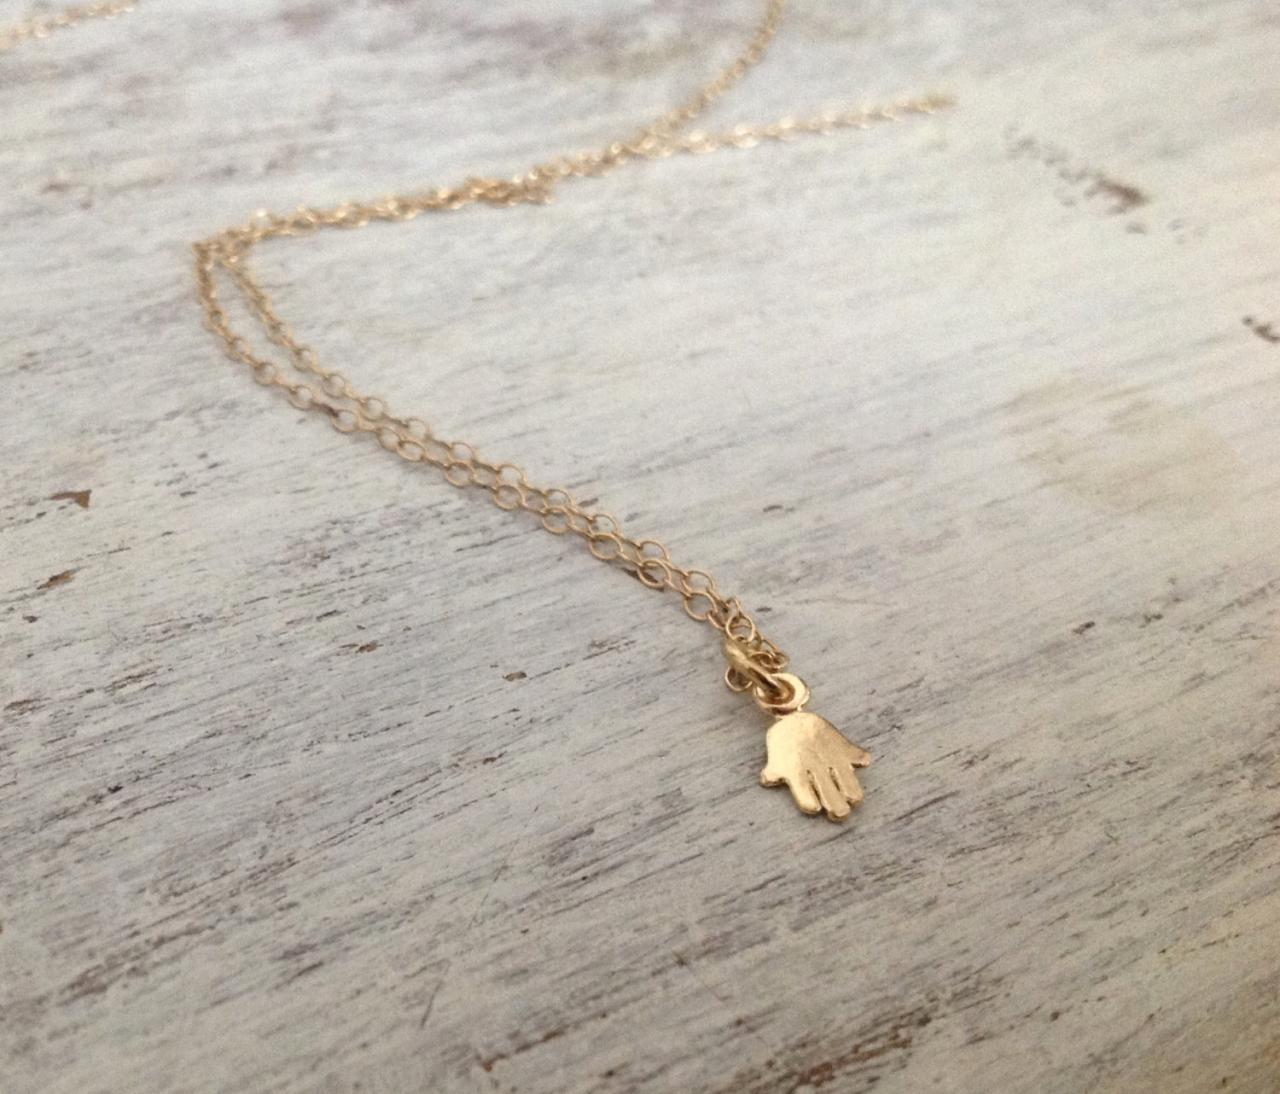 gold necklace, gold hamsa necklace, tiny hamsa necklace, petite jewelry, casual necklace, small petite necklace 012